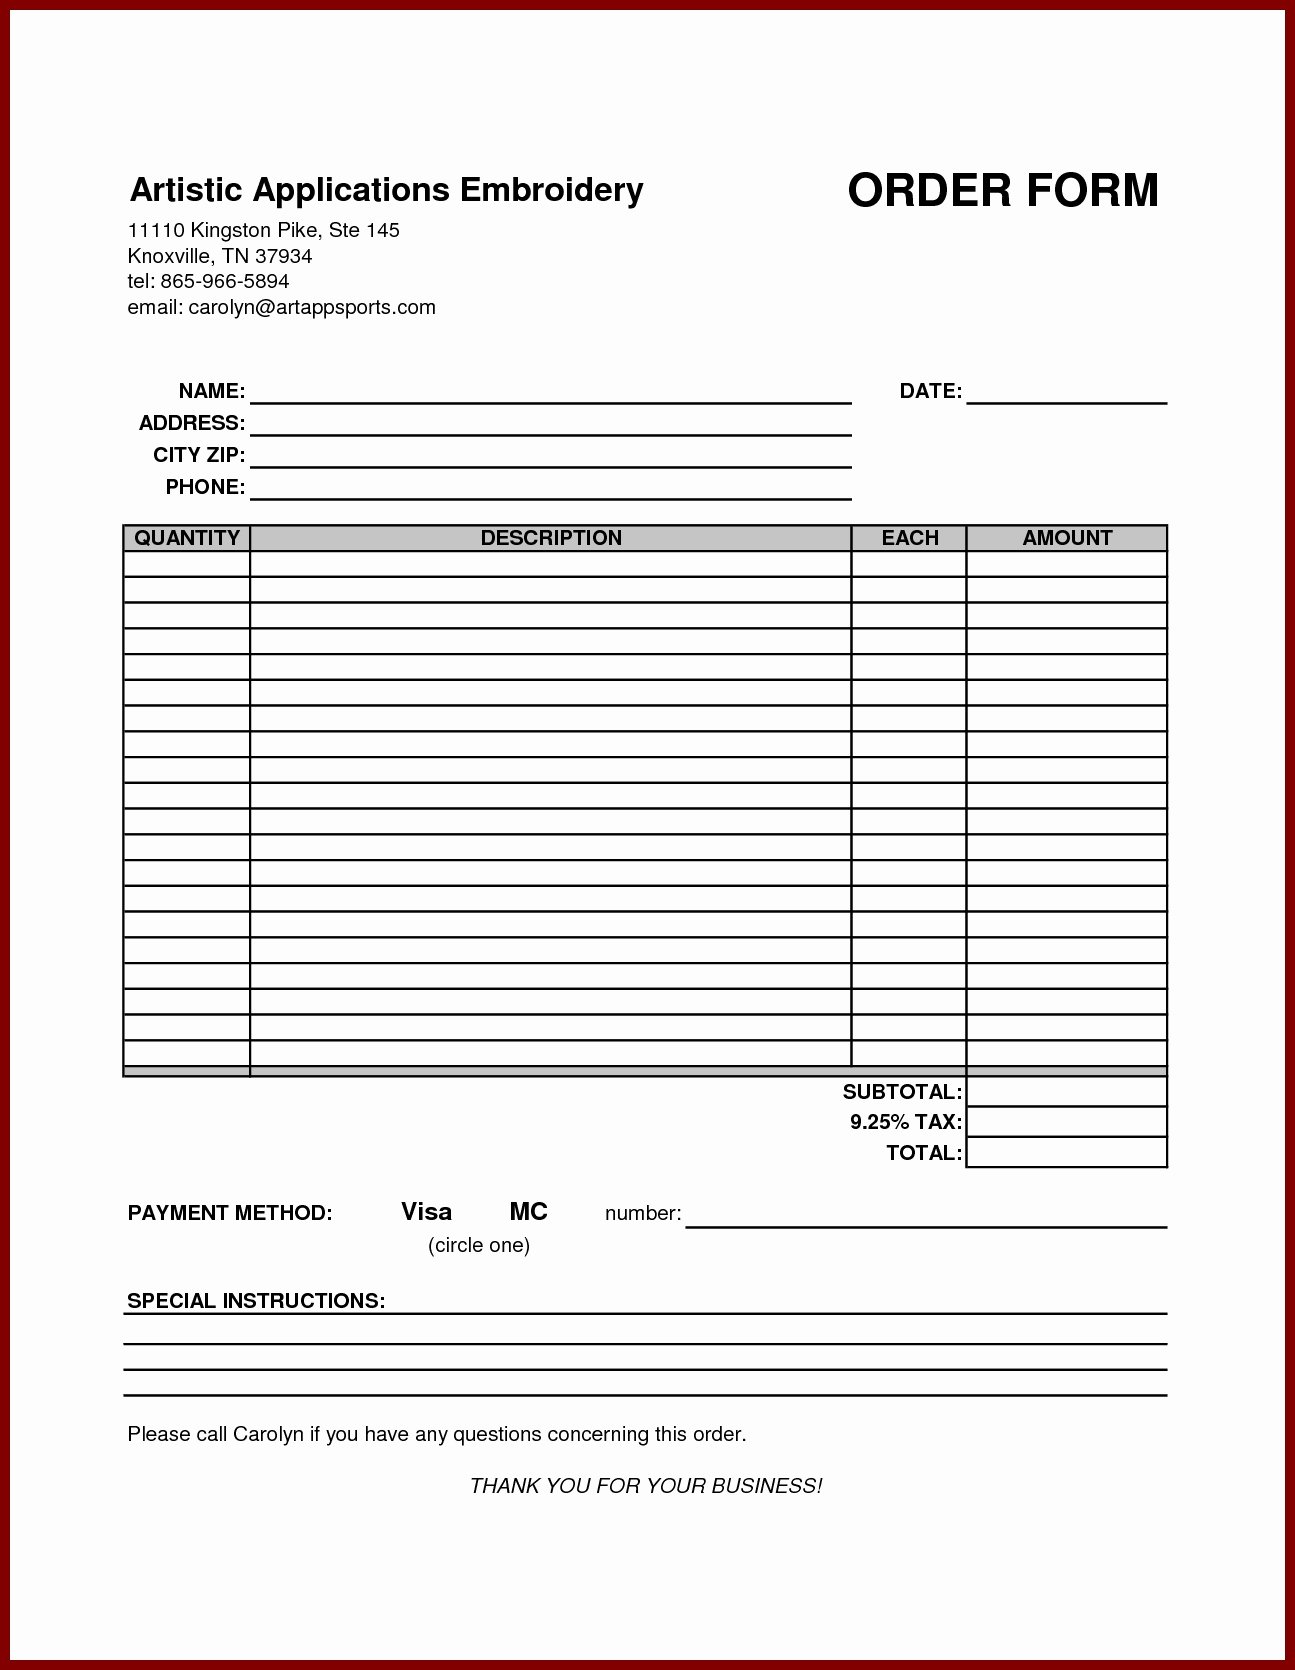 Products order form Template Awesome order form Template